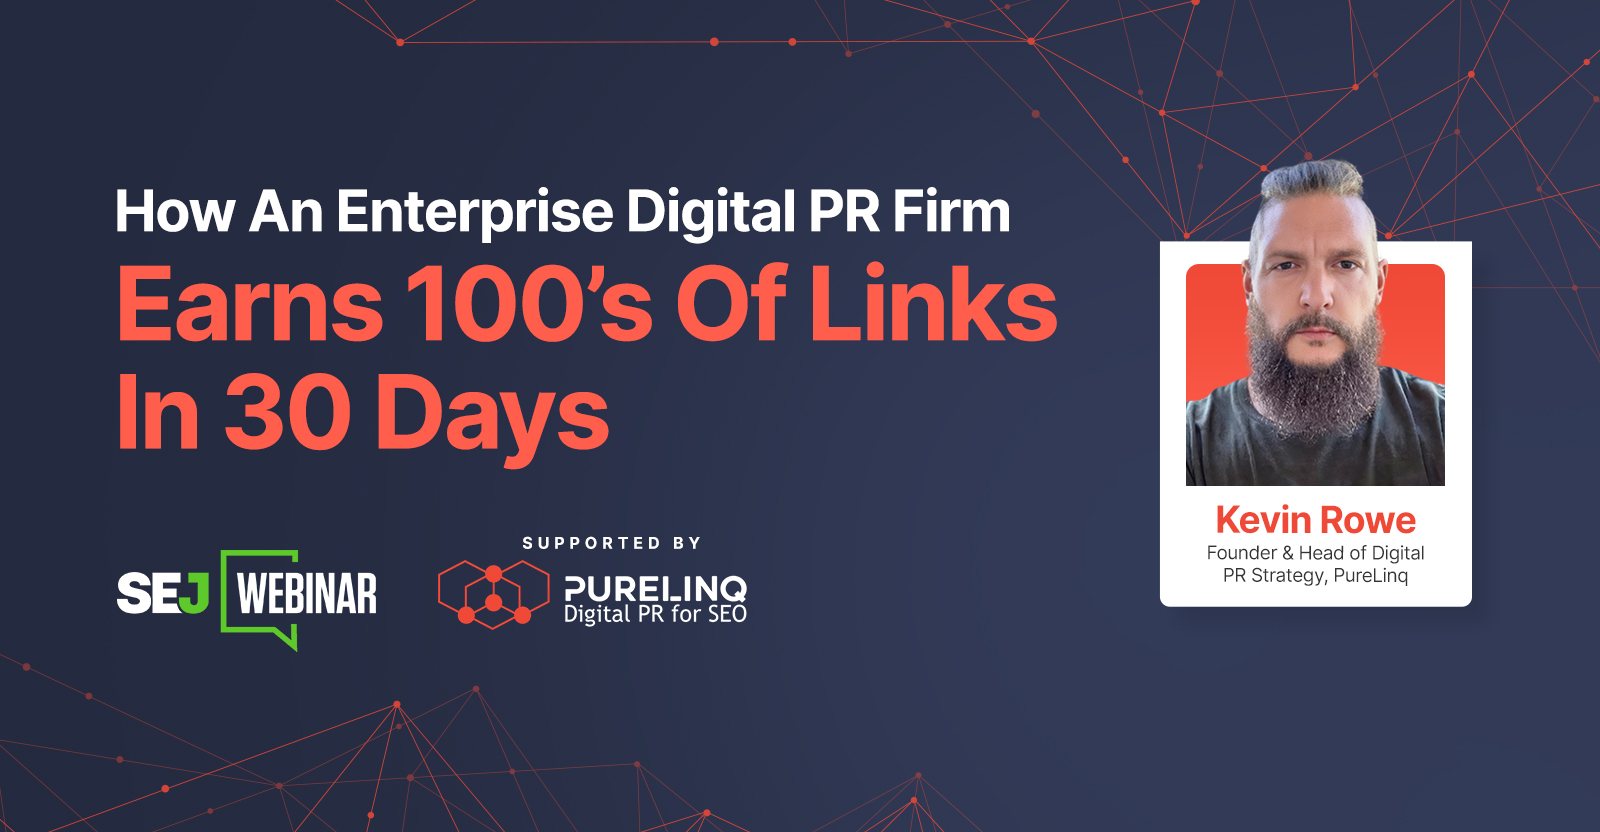 How An Enterprise PR Firm Earns 100's of Links In 30 Days